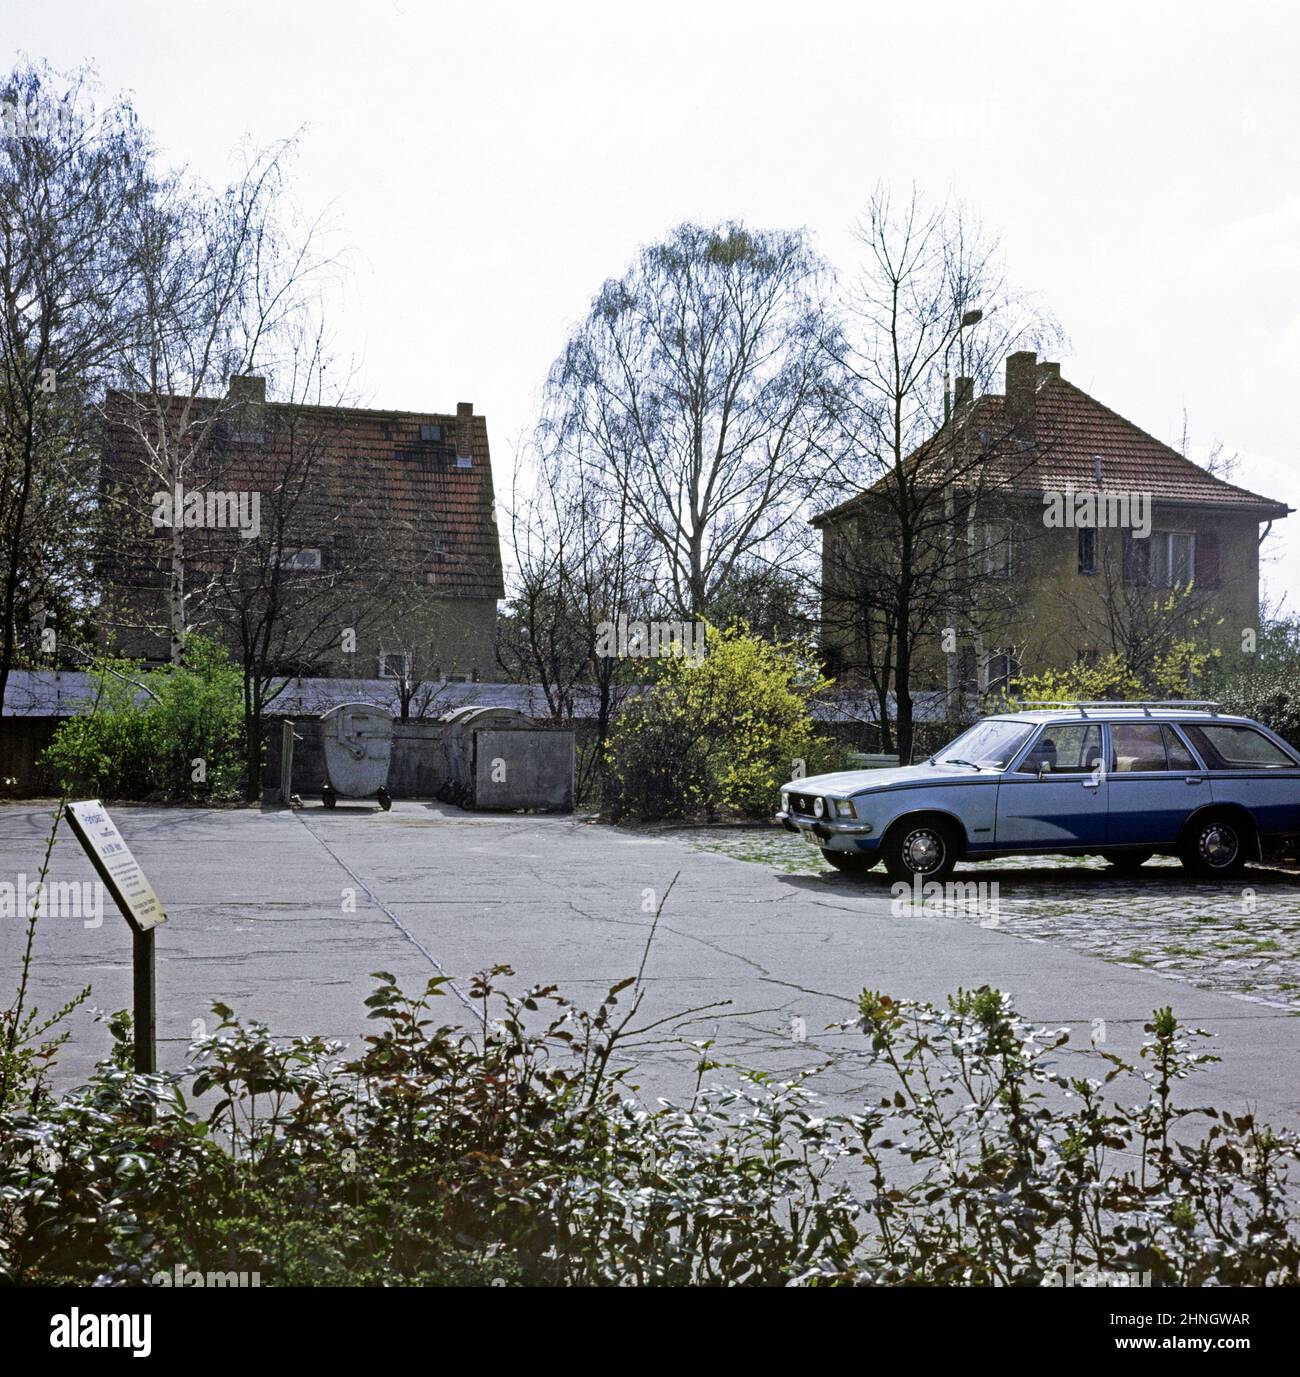 Border between Berlin-Zehlendorf and GDR, late 1970s, Neuruppiner Straße, the carpark is located in West Berlin, the houses in GDR, Berlin, Germany Stock Photo